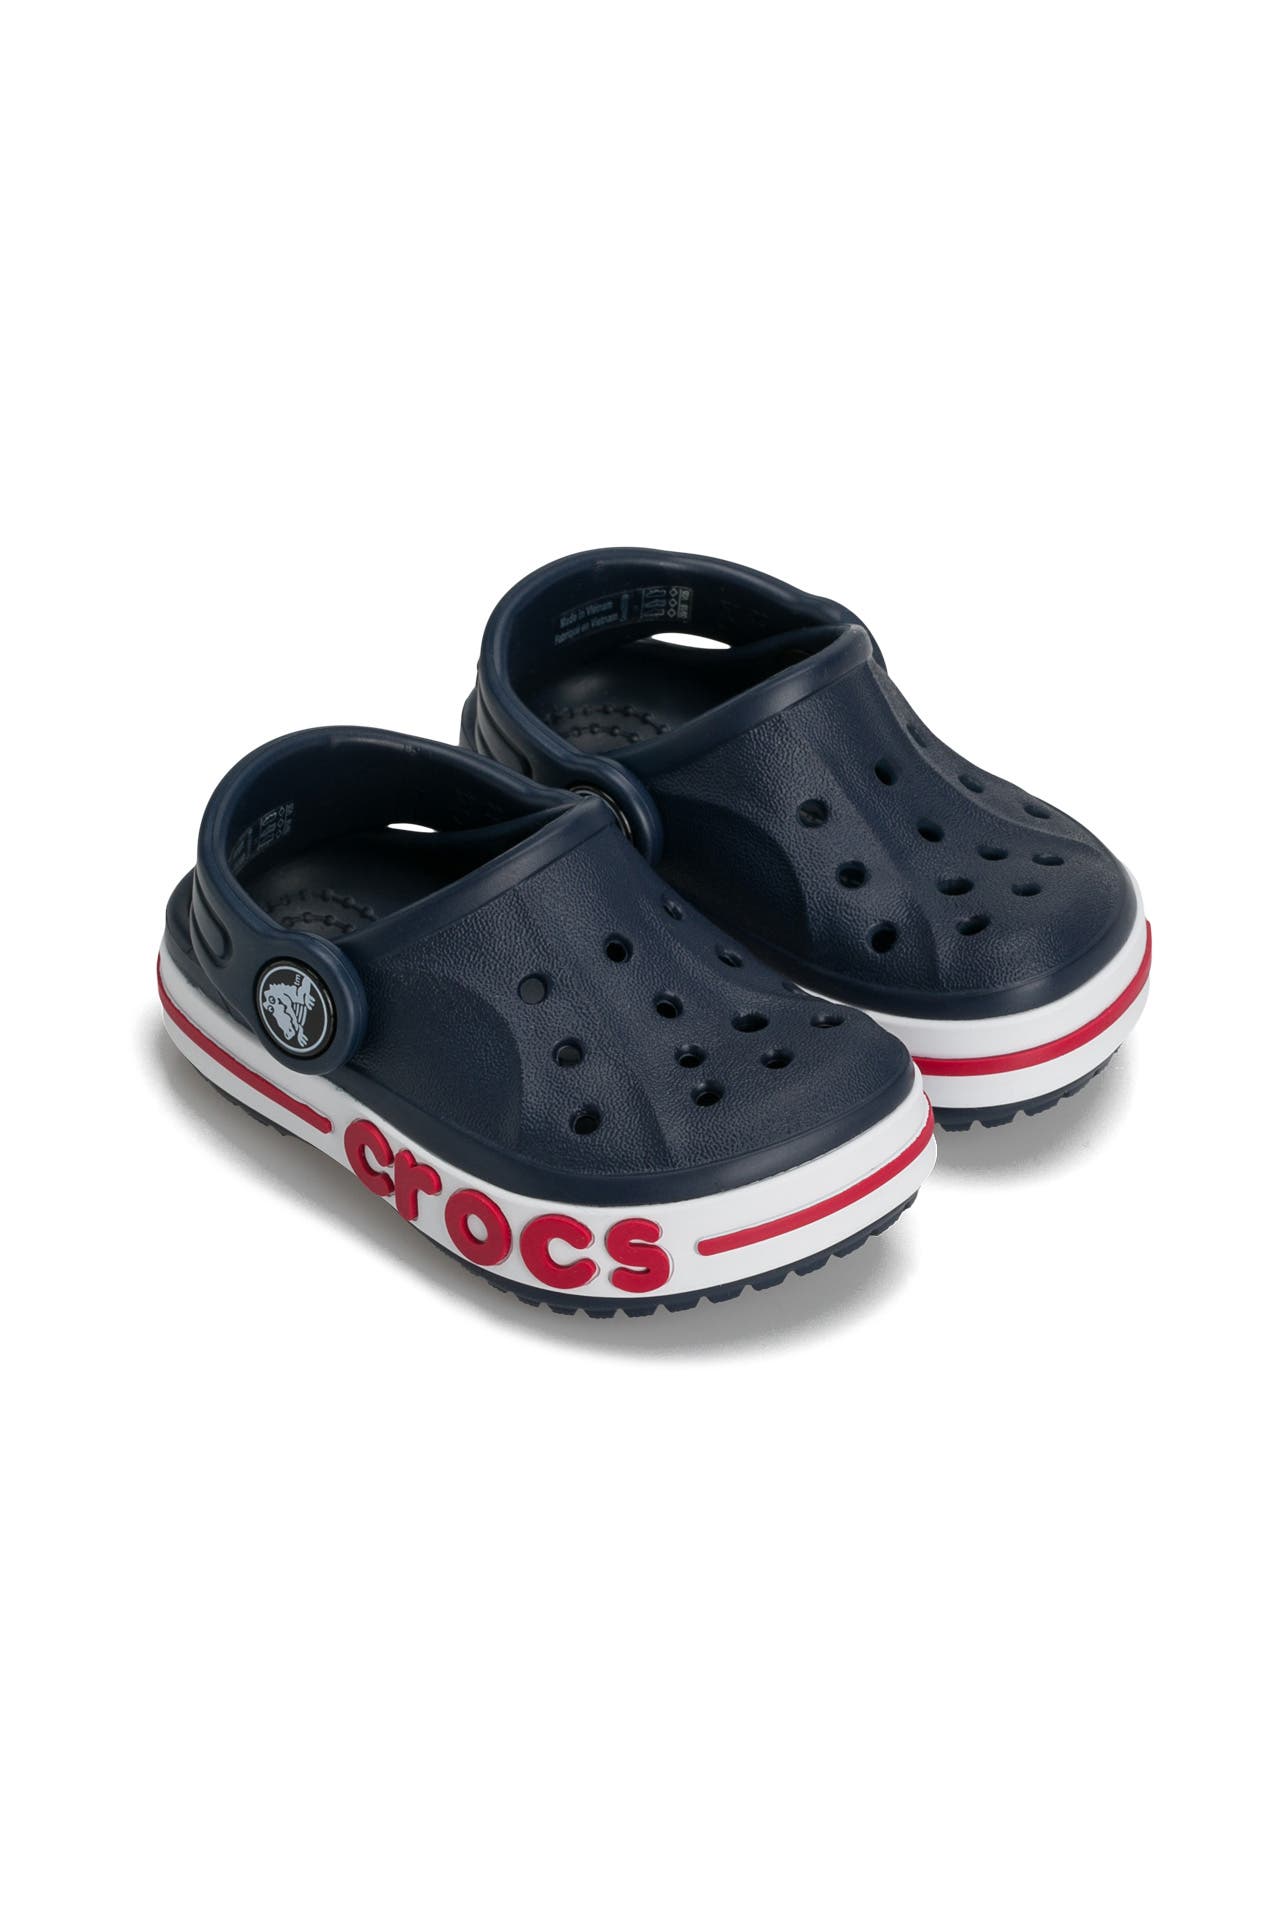 Crocs OUTLET in Germany • Sale off | Outletcity Metzingen